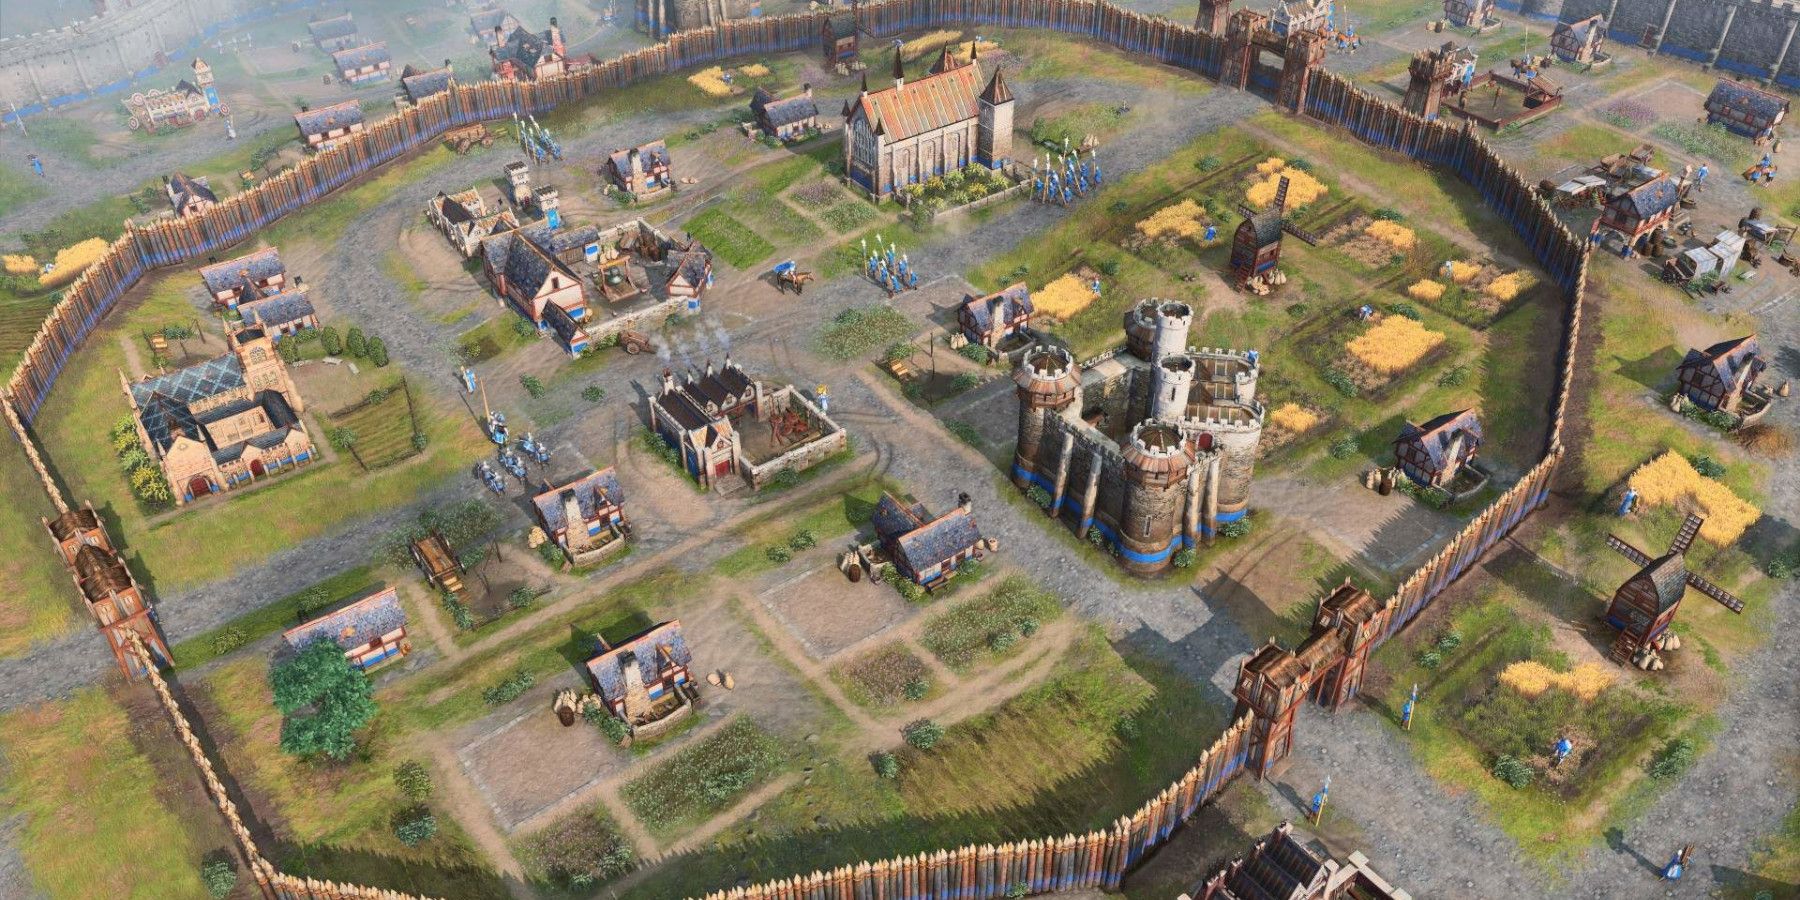 age-of-empires-4-town-with-large-wall